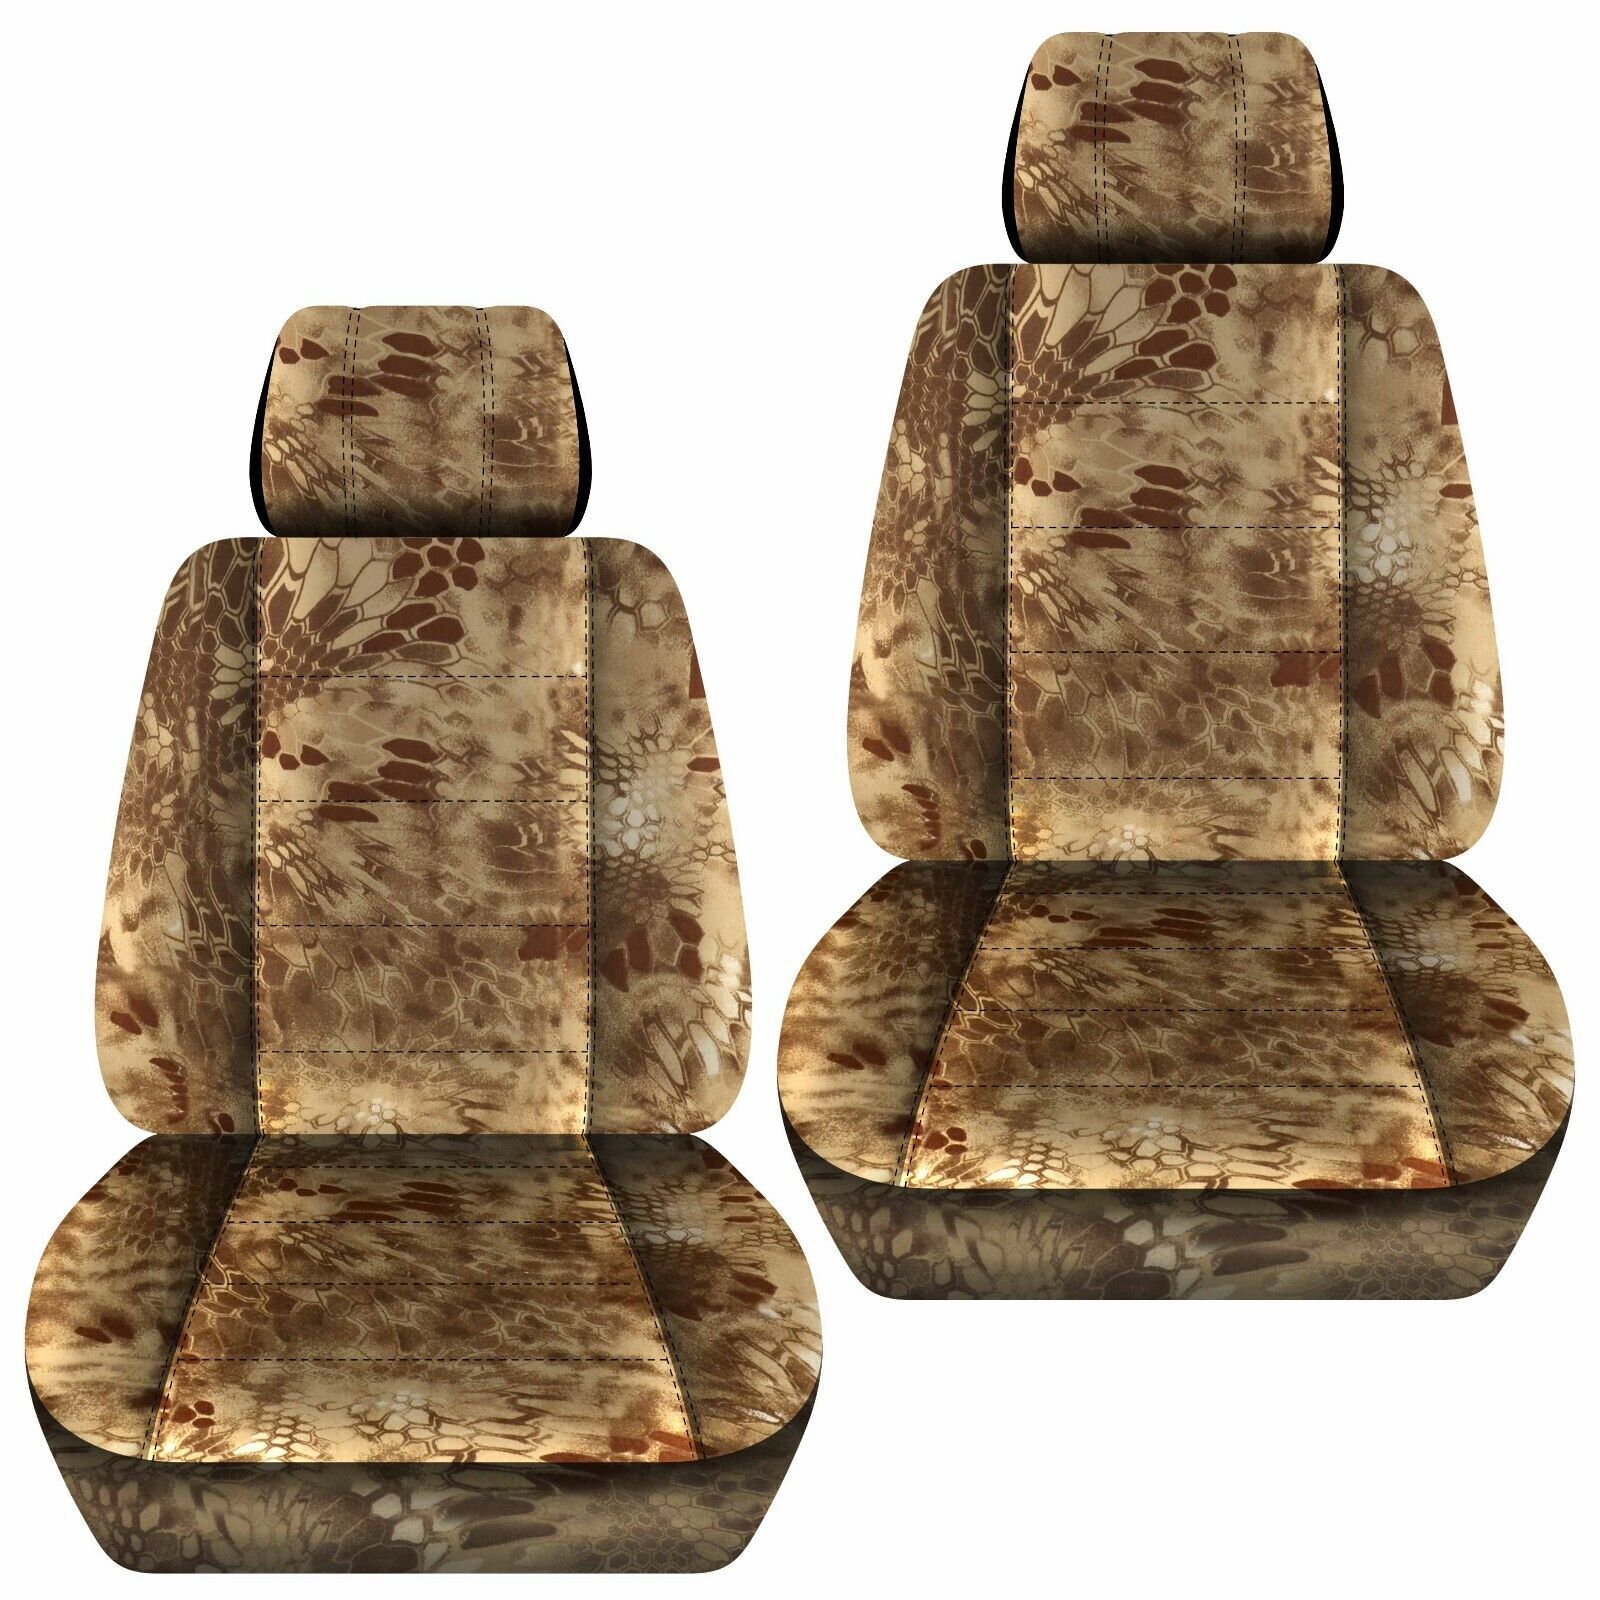 Primary image for Front set car seat covers fits Ford Explorer 1991-2002  kryptek tan camo